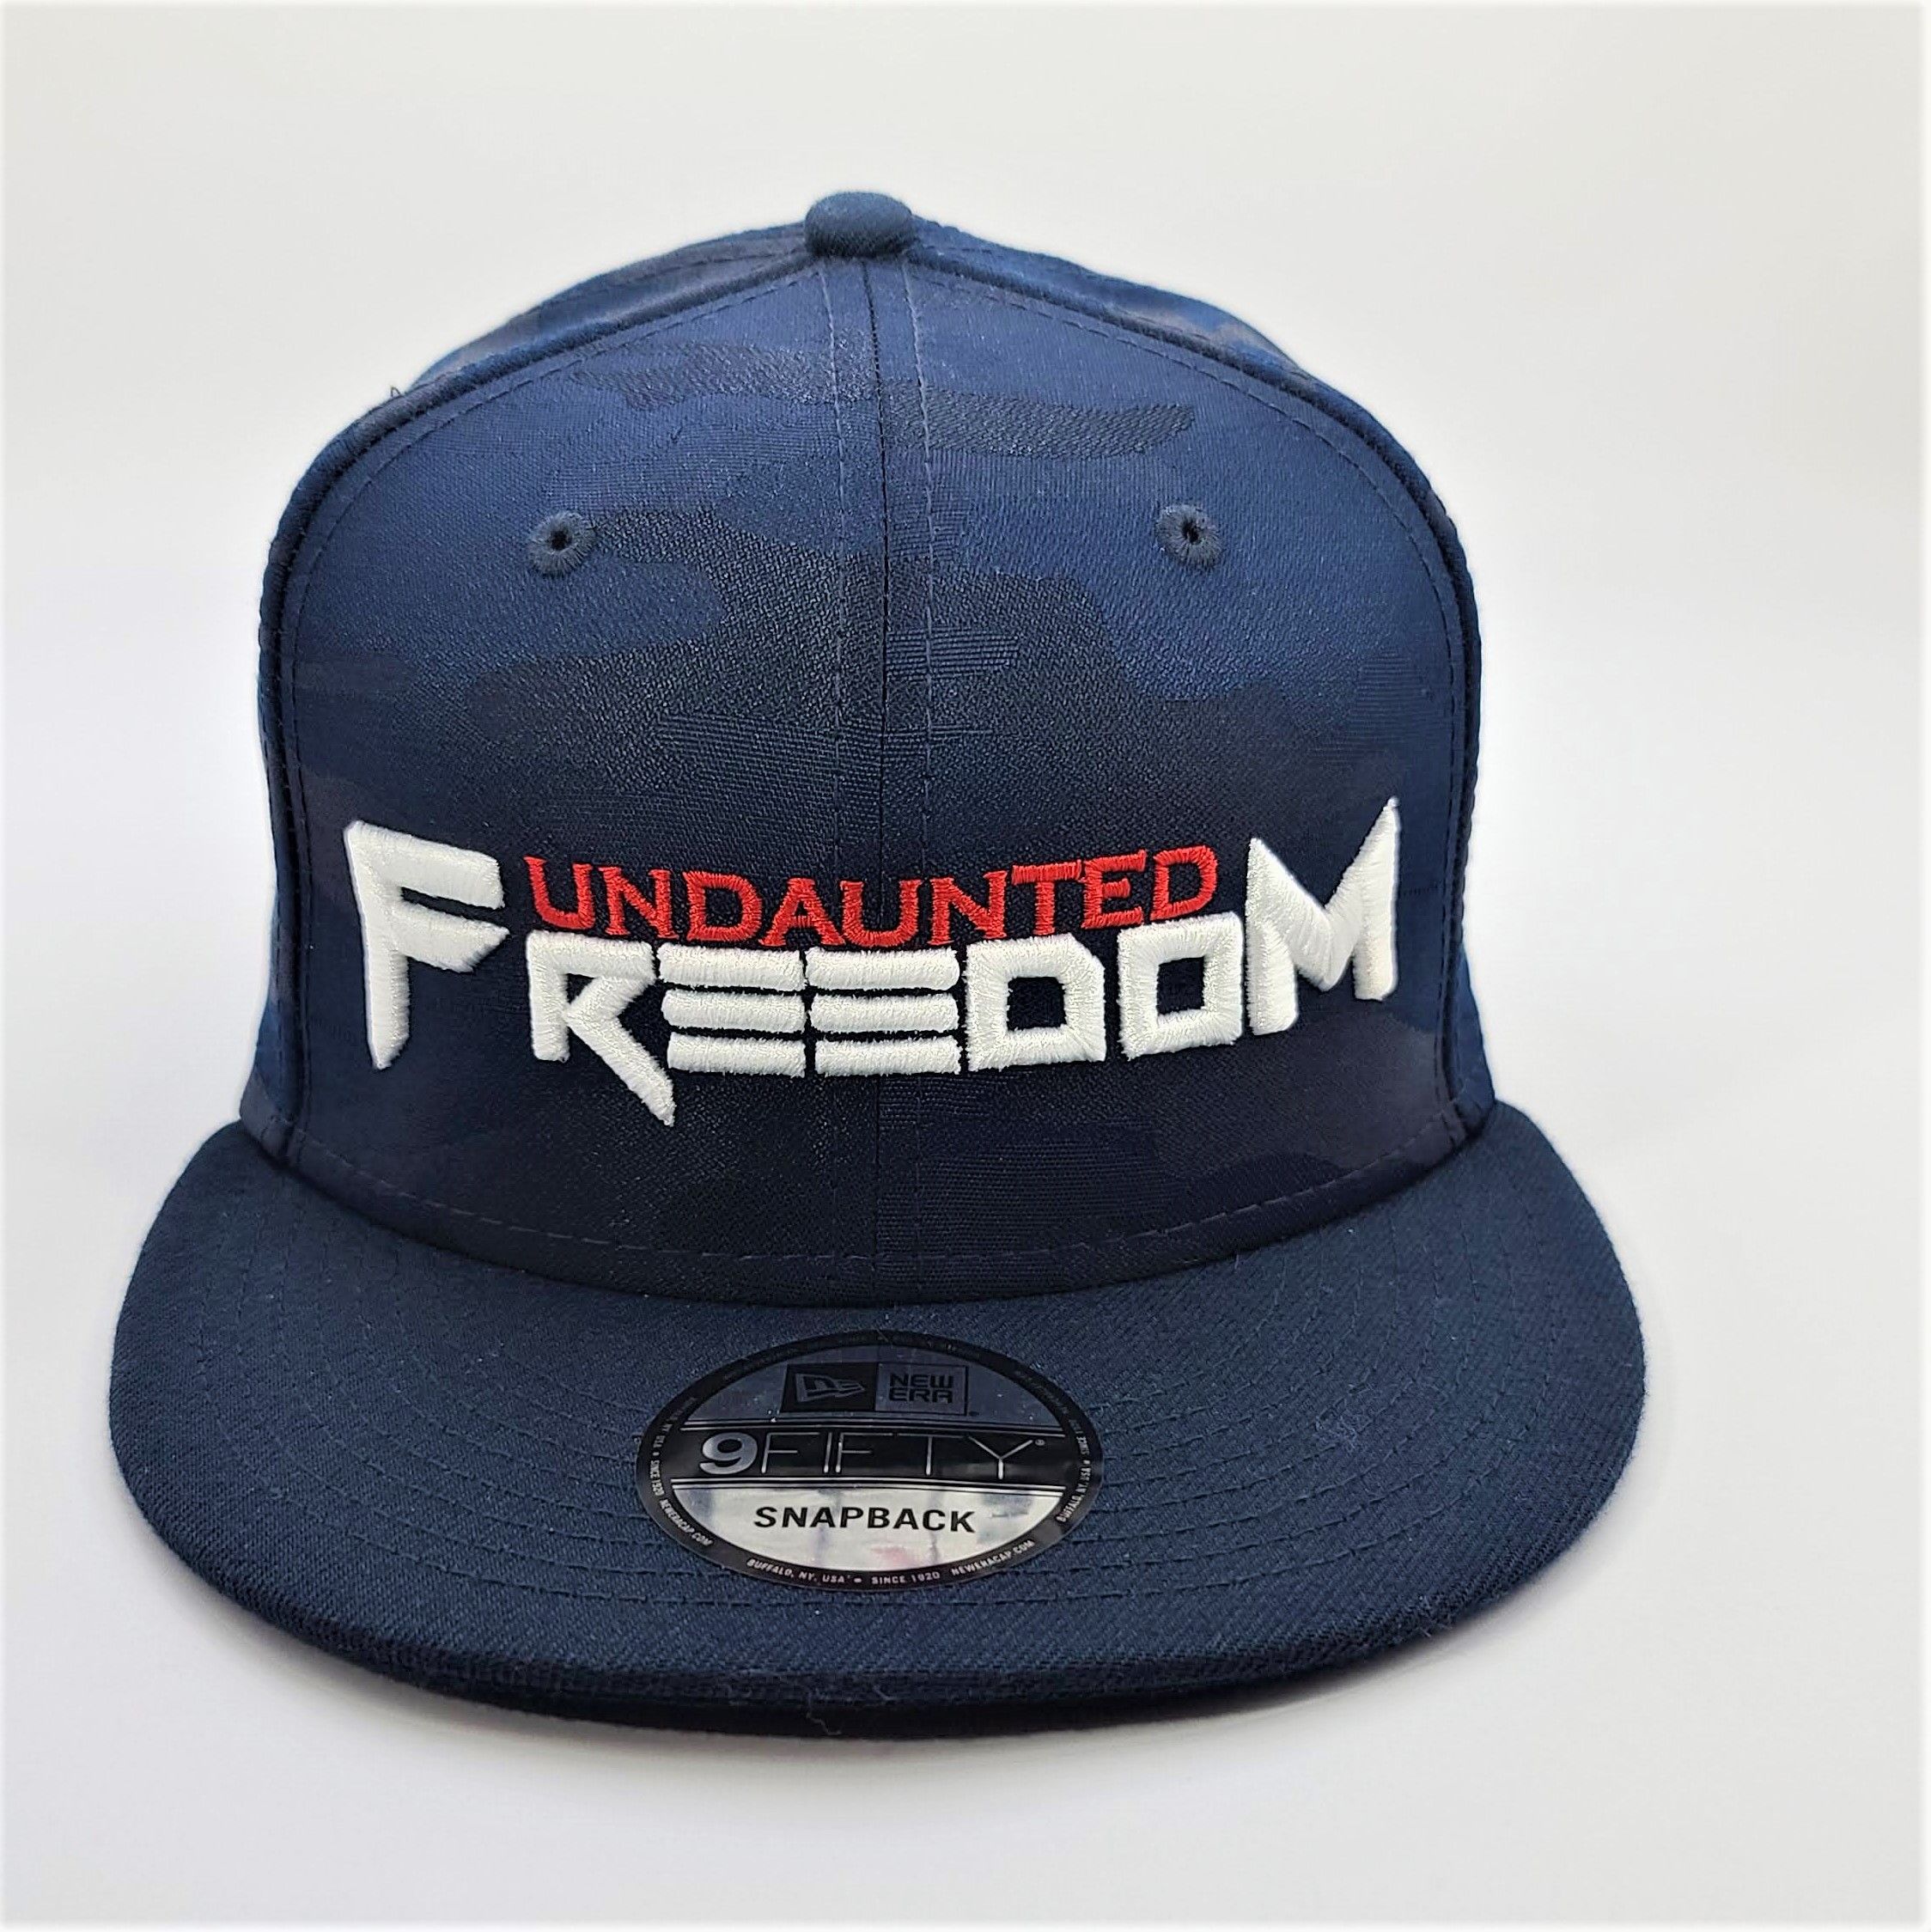 Undaunted Freedom Hat - Be Undaunted; Wear What Matters